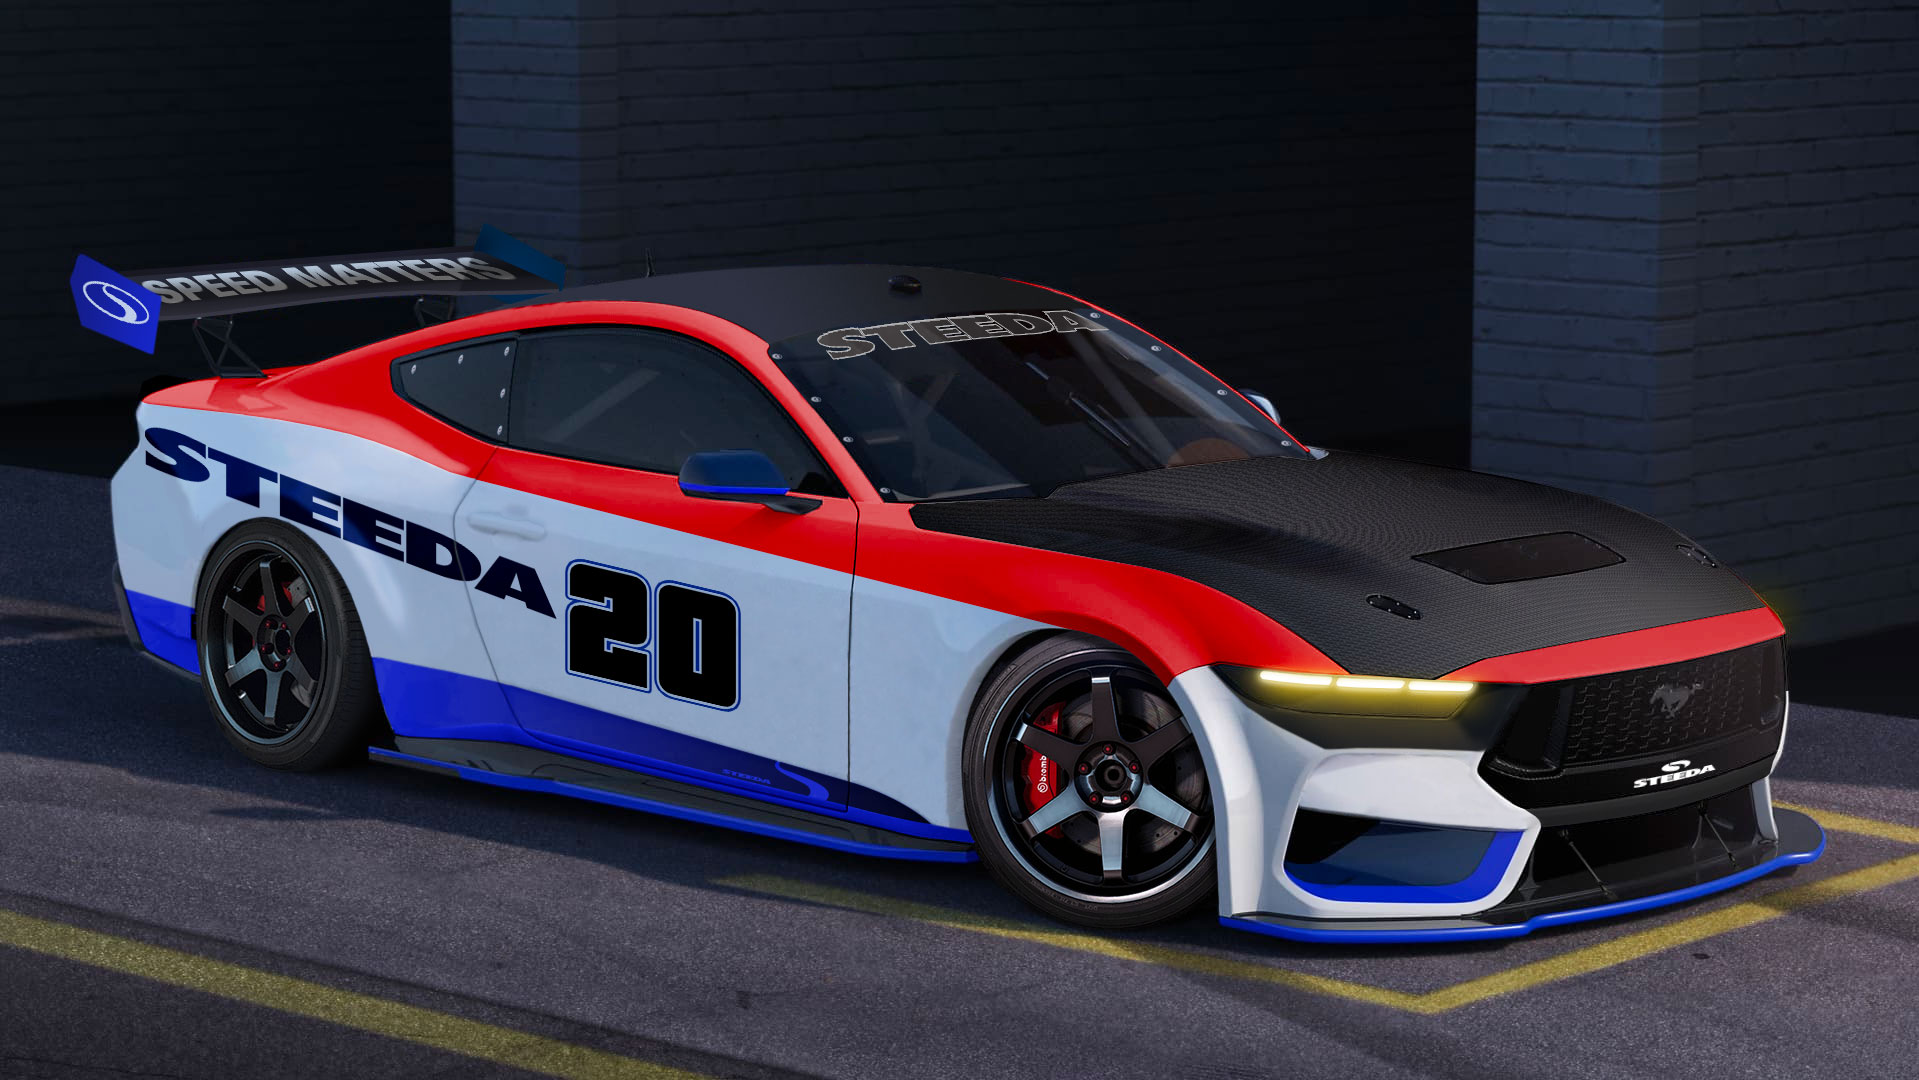 S650 Mustang Hello From Steeda! 20raceCar-newLivery (3)